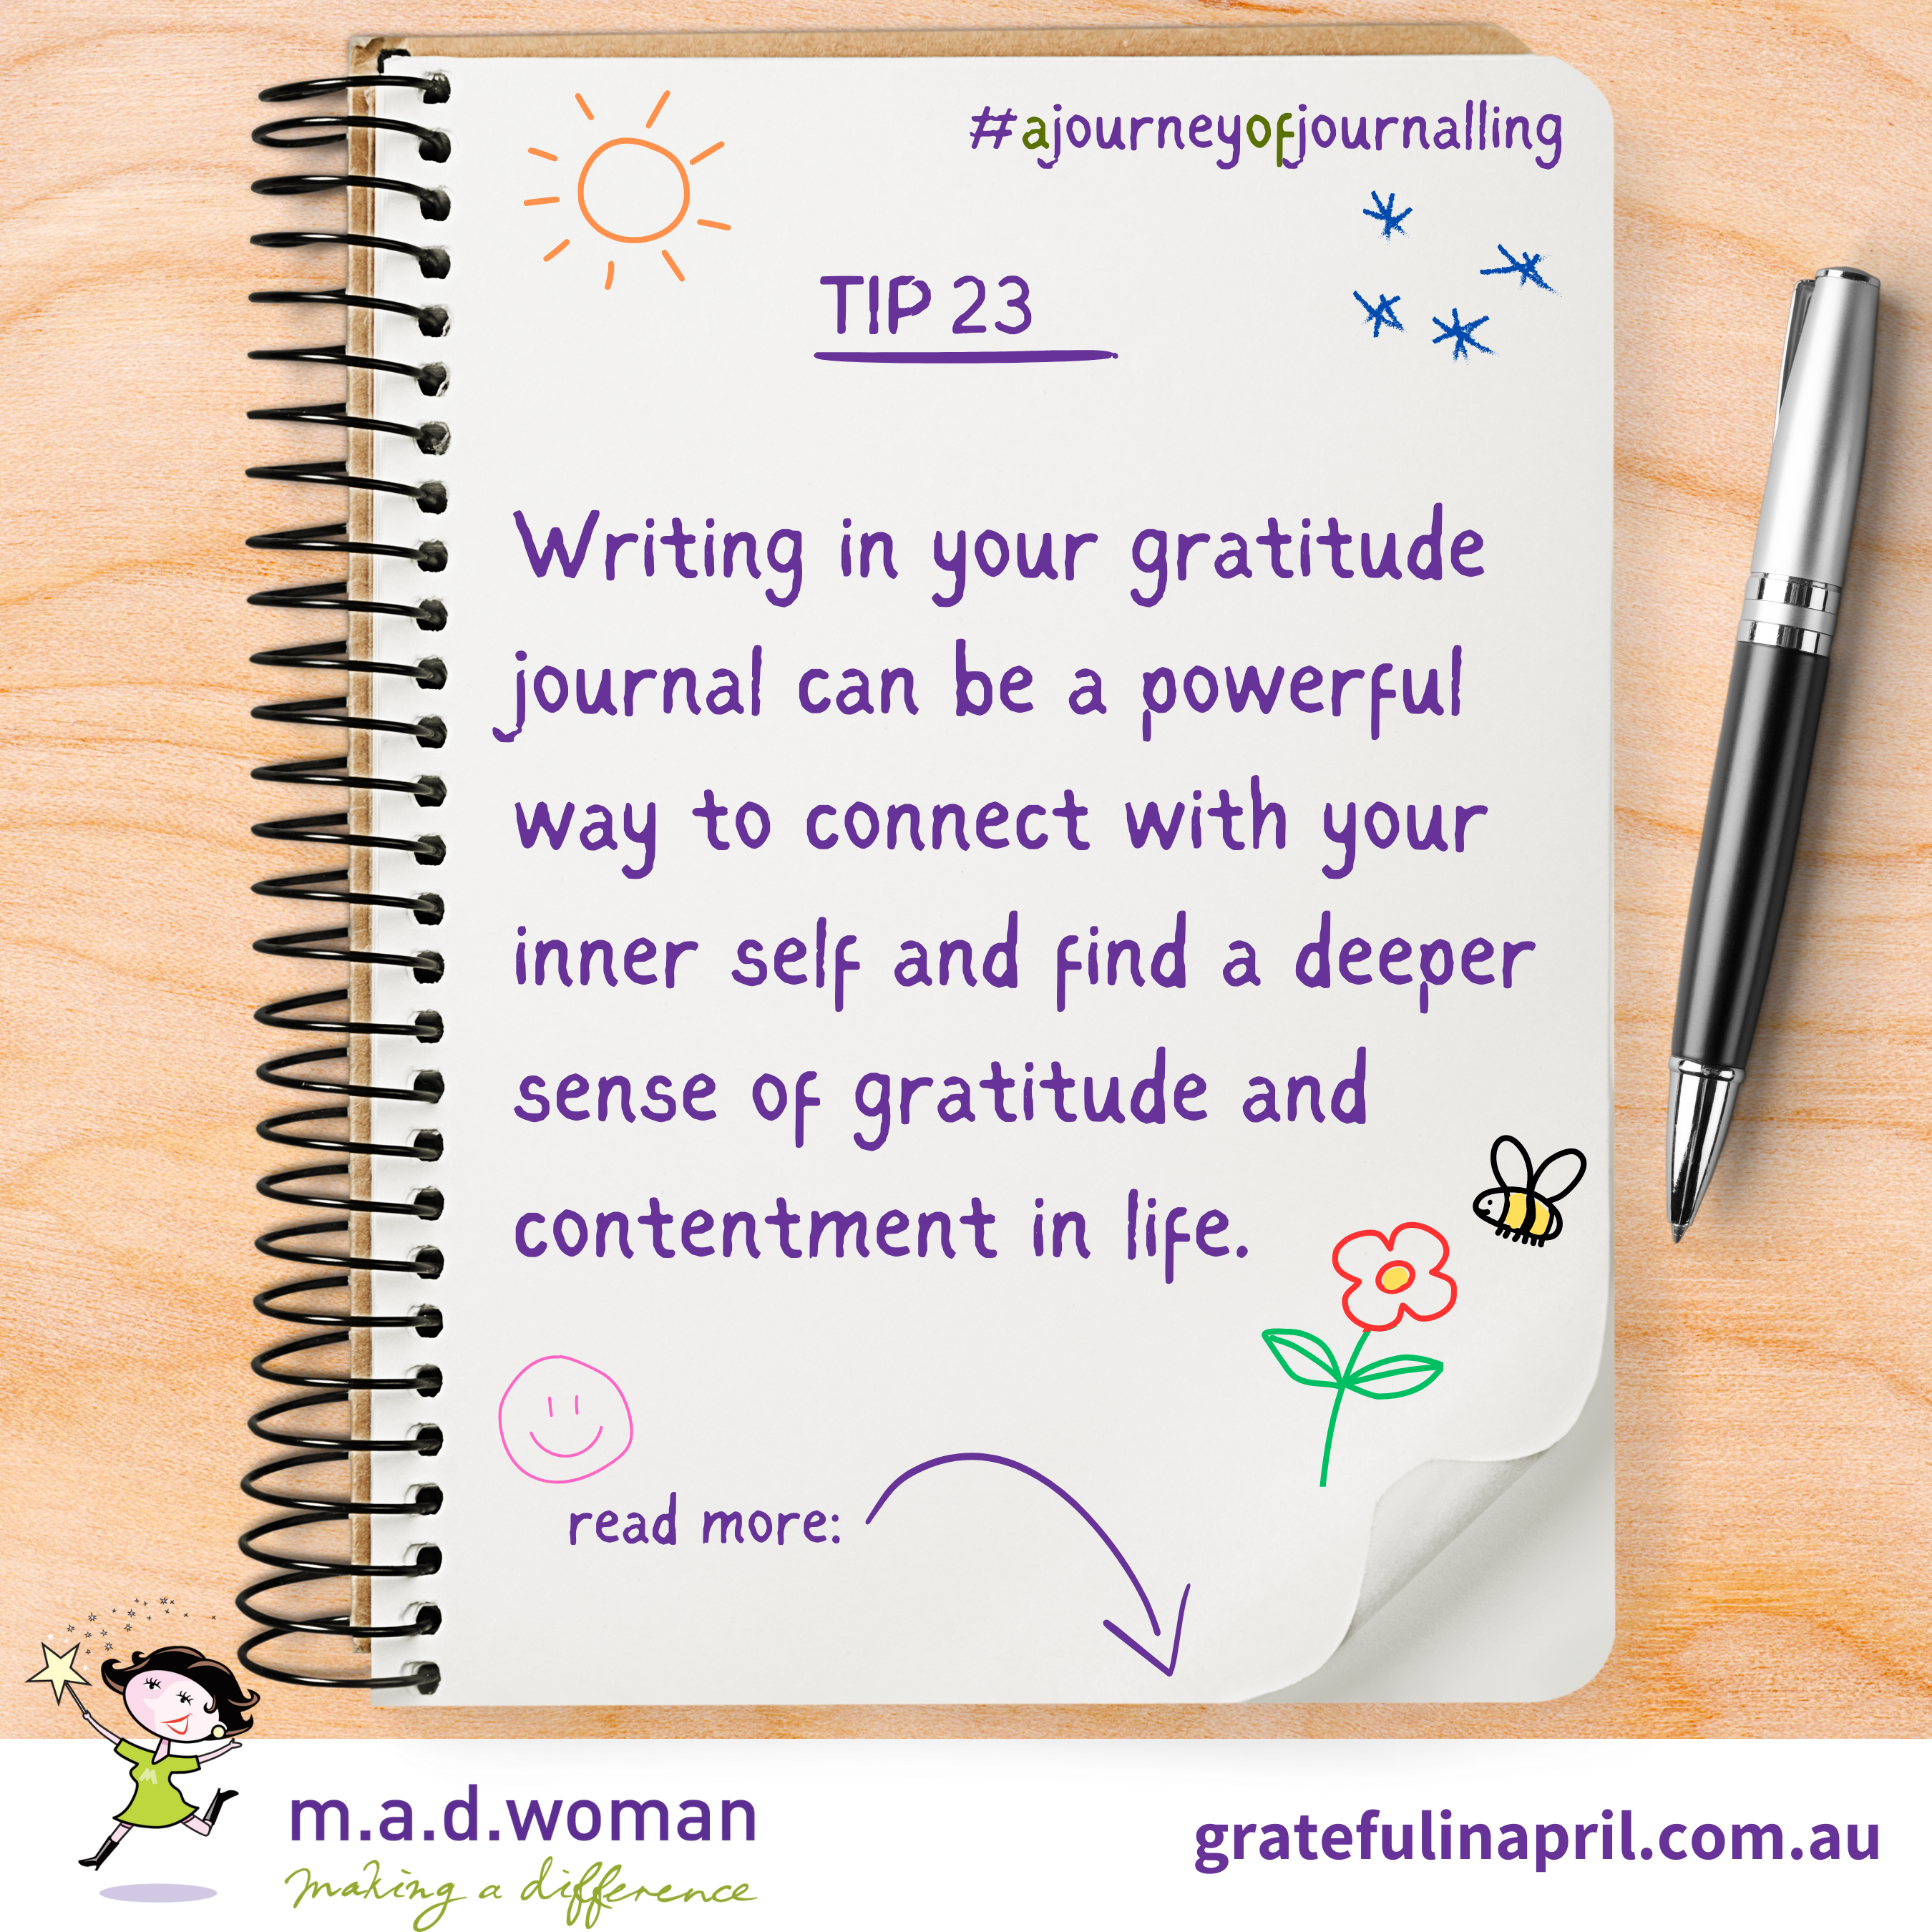 Tip 23 - a journey of journalling